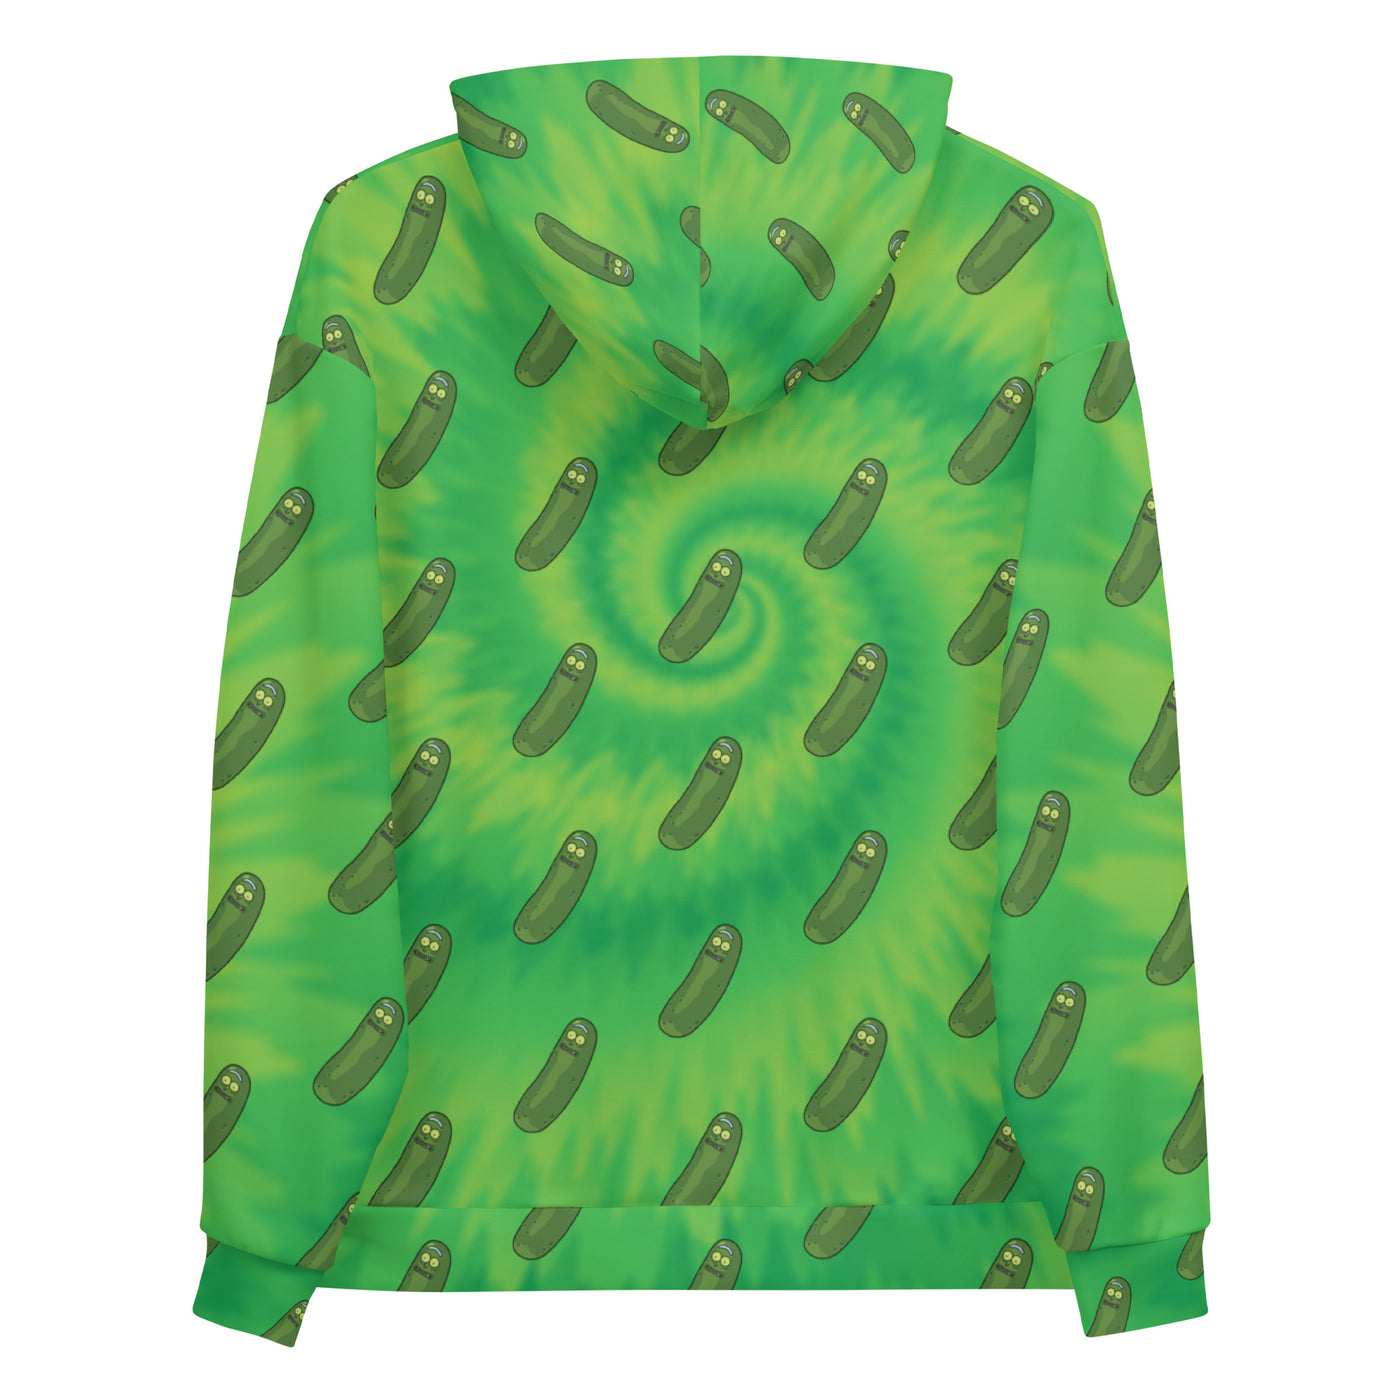 Rick and Morty Pickle Rick Pattern Hooded Sweatshirt